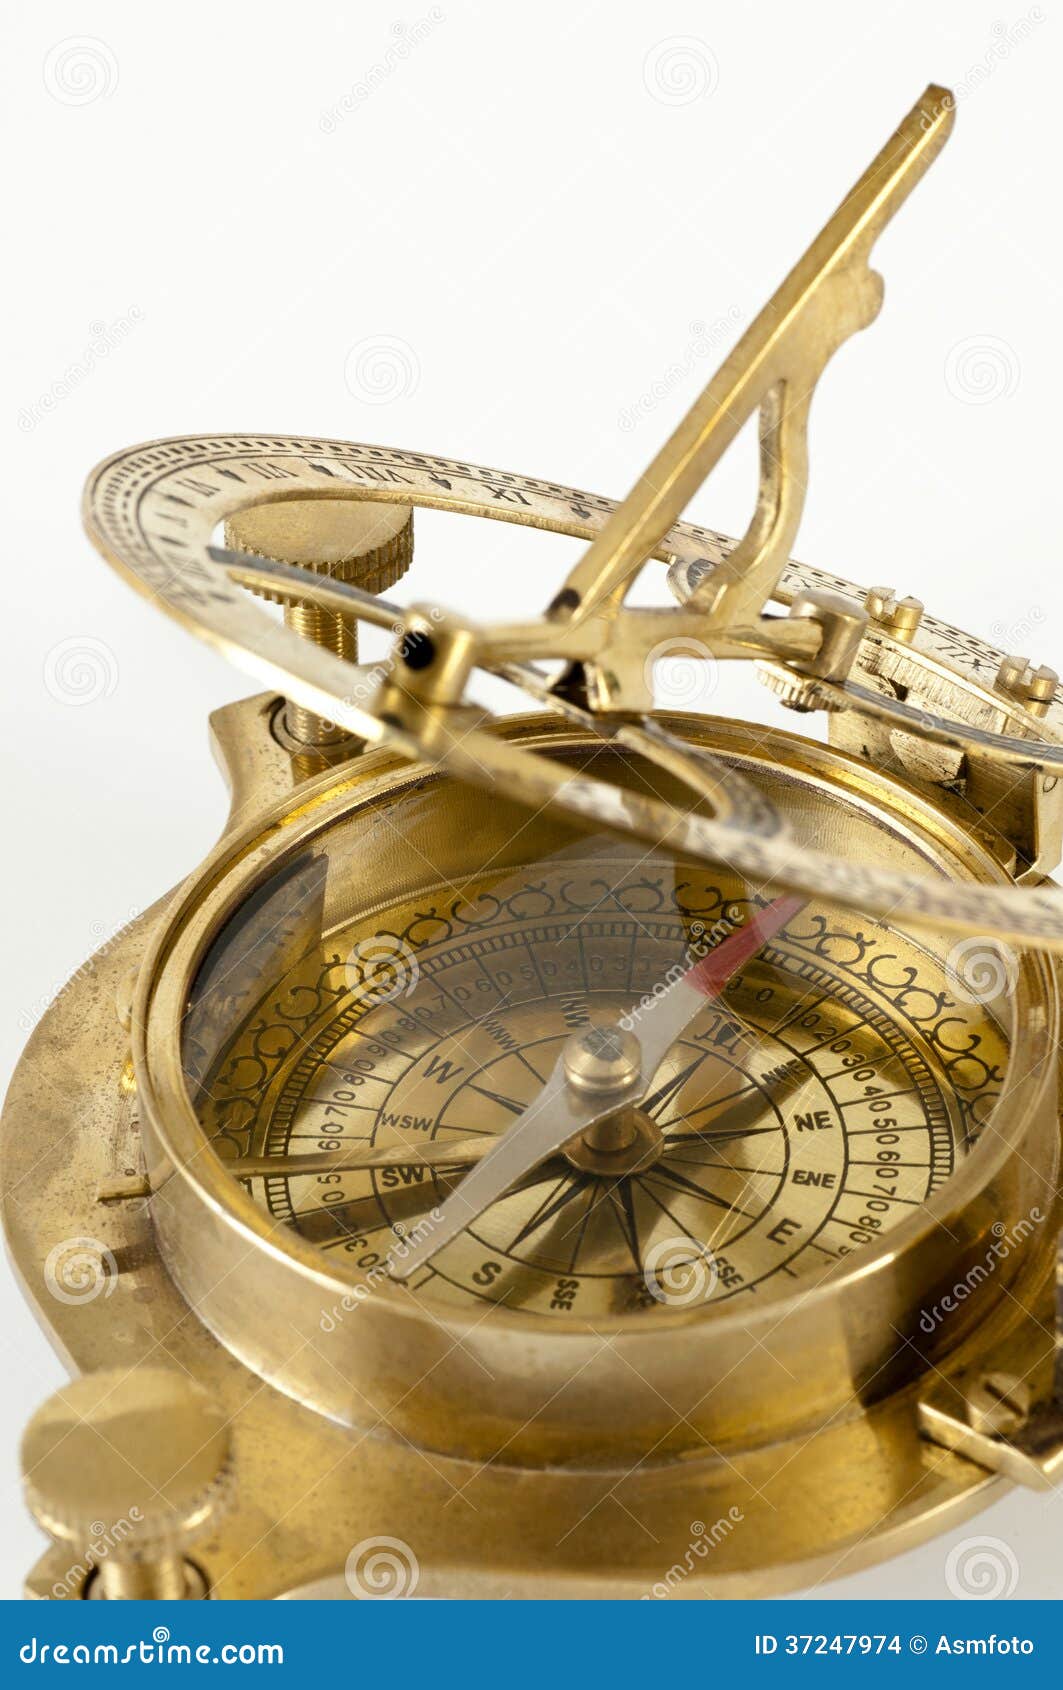 https://thumbs.dreamstime.com/z/old-brass-sextant-part-measuring-instrument-navigation-isolated-37247974.jpg